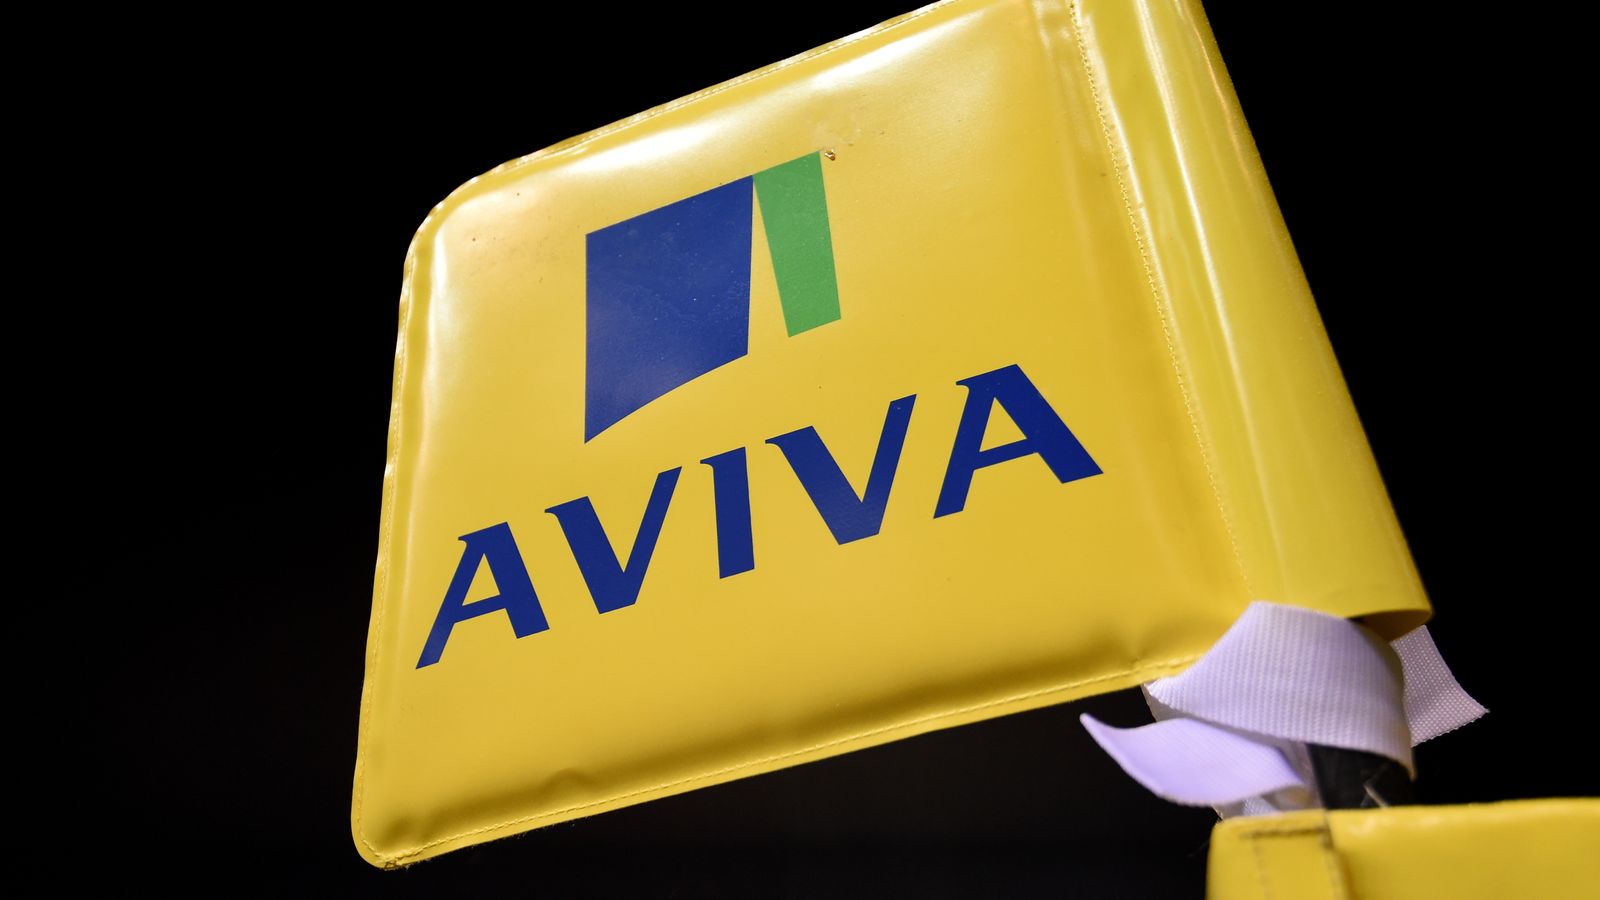 Aviva added more than 100,000 private health insurance customers in a year as NHS struggled